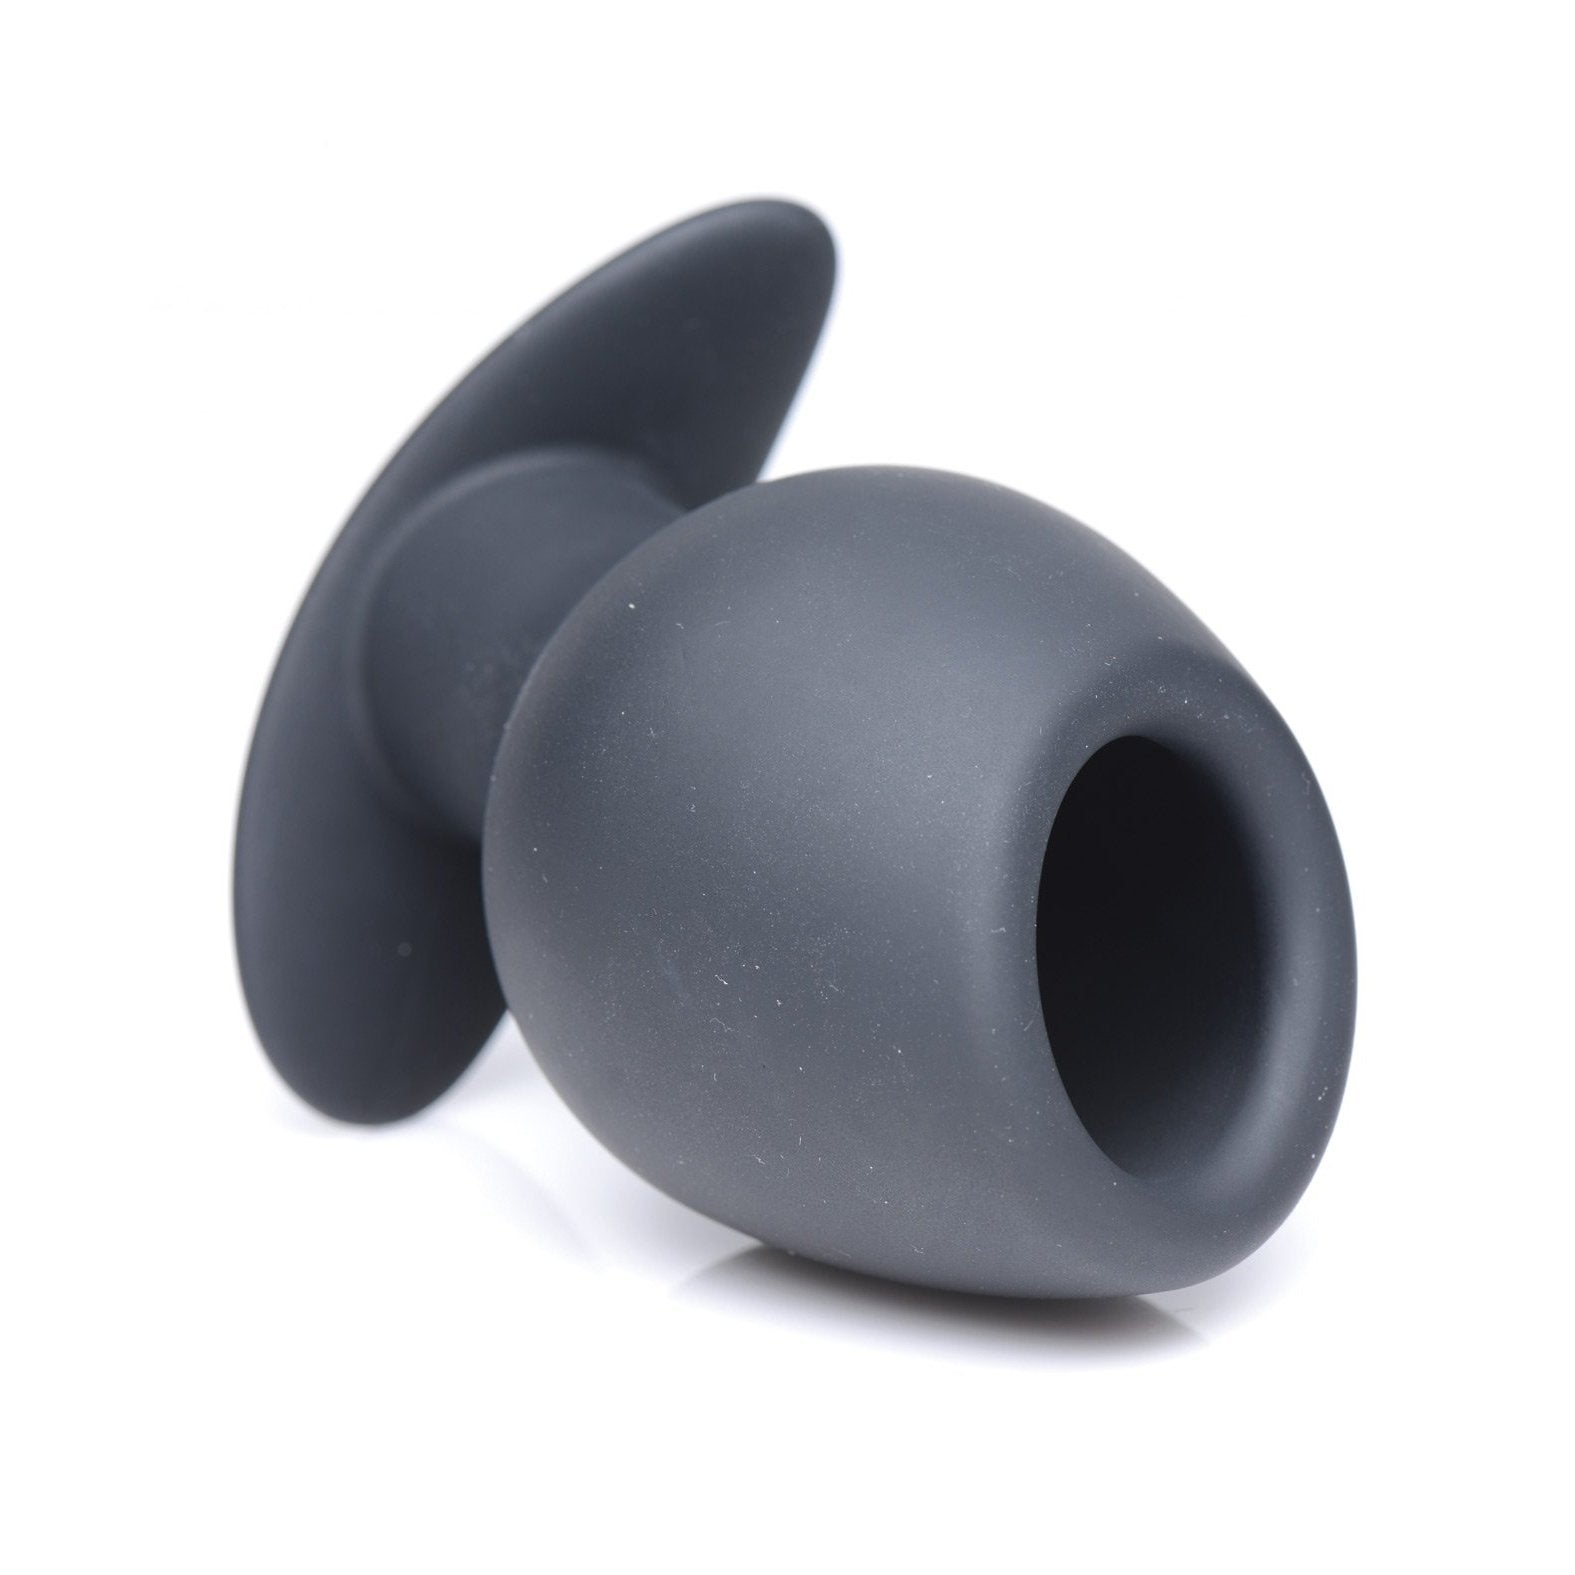 Master Series Ass Goblet Silicone Hollow Anal Plug Small